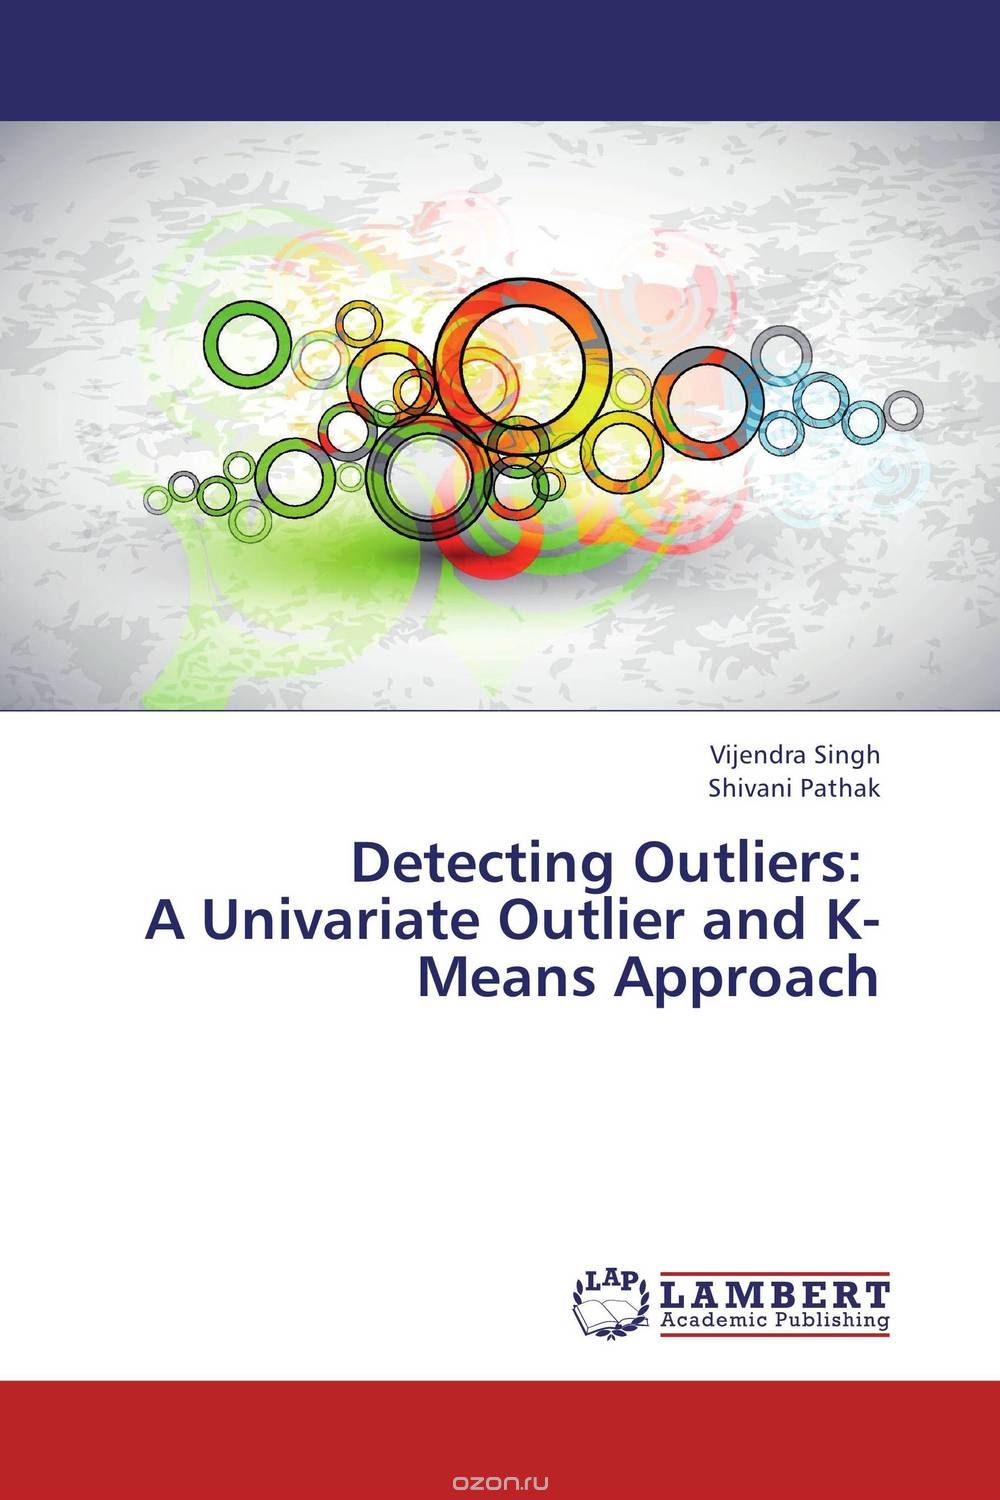 Скачать книгу "Detecting Outliers:   A Univariate Outlier and K-Means Approach"